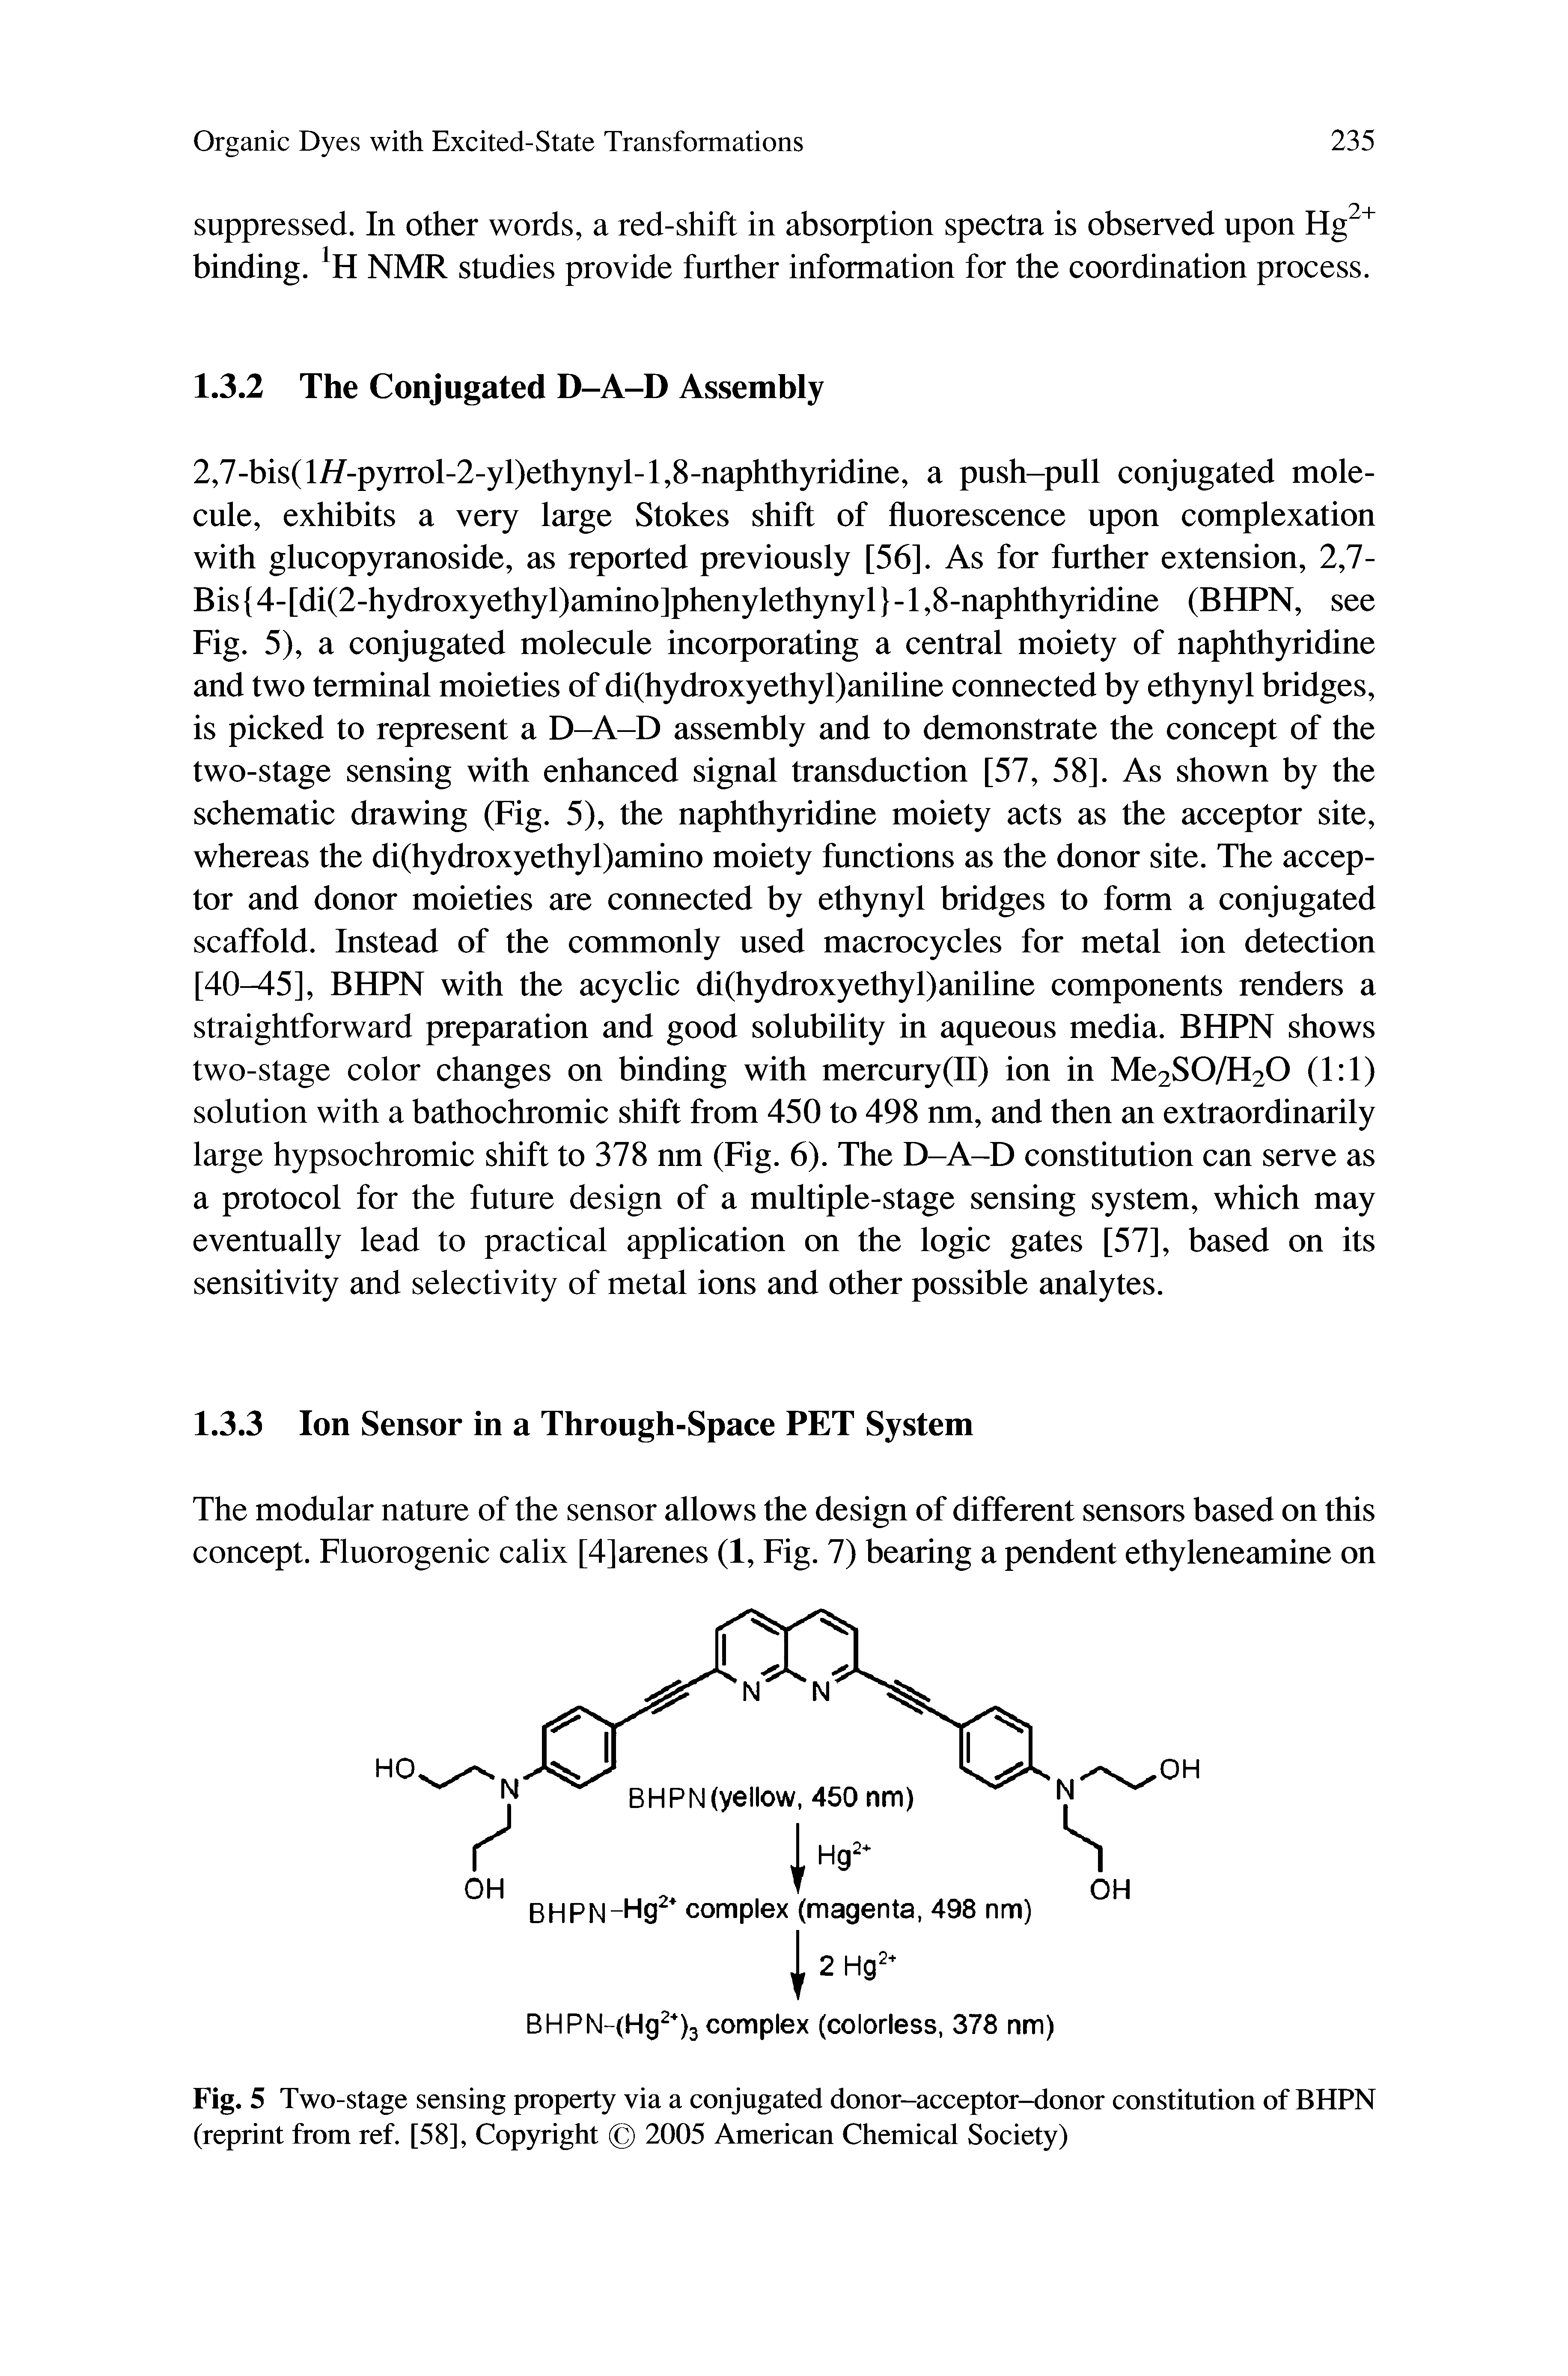 Fig. 5 Two-stage sensing property via a conjugated donor-acceptor-donor constitution of BHPN (reprint from ref. [58], Copyright 2005 American Chemical Society)...